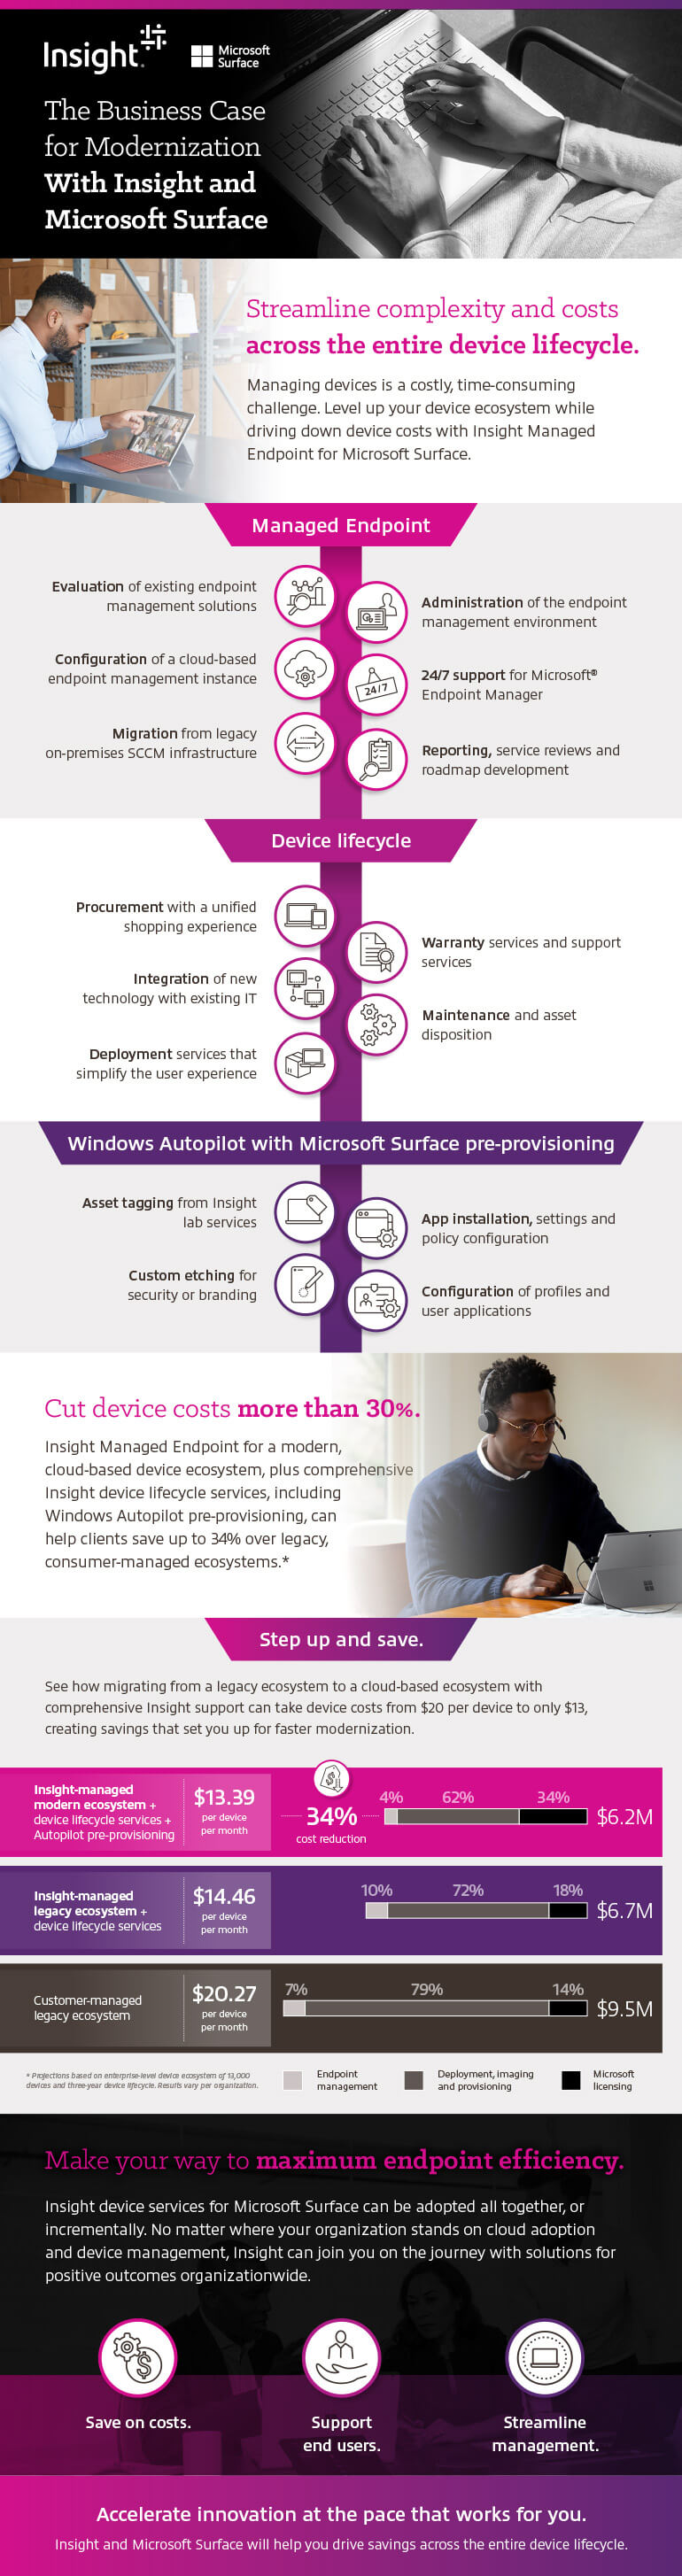 The Business Case for Modernization With Insight and Microsoft Surface infographic as transcribed below